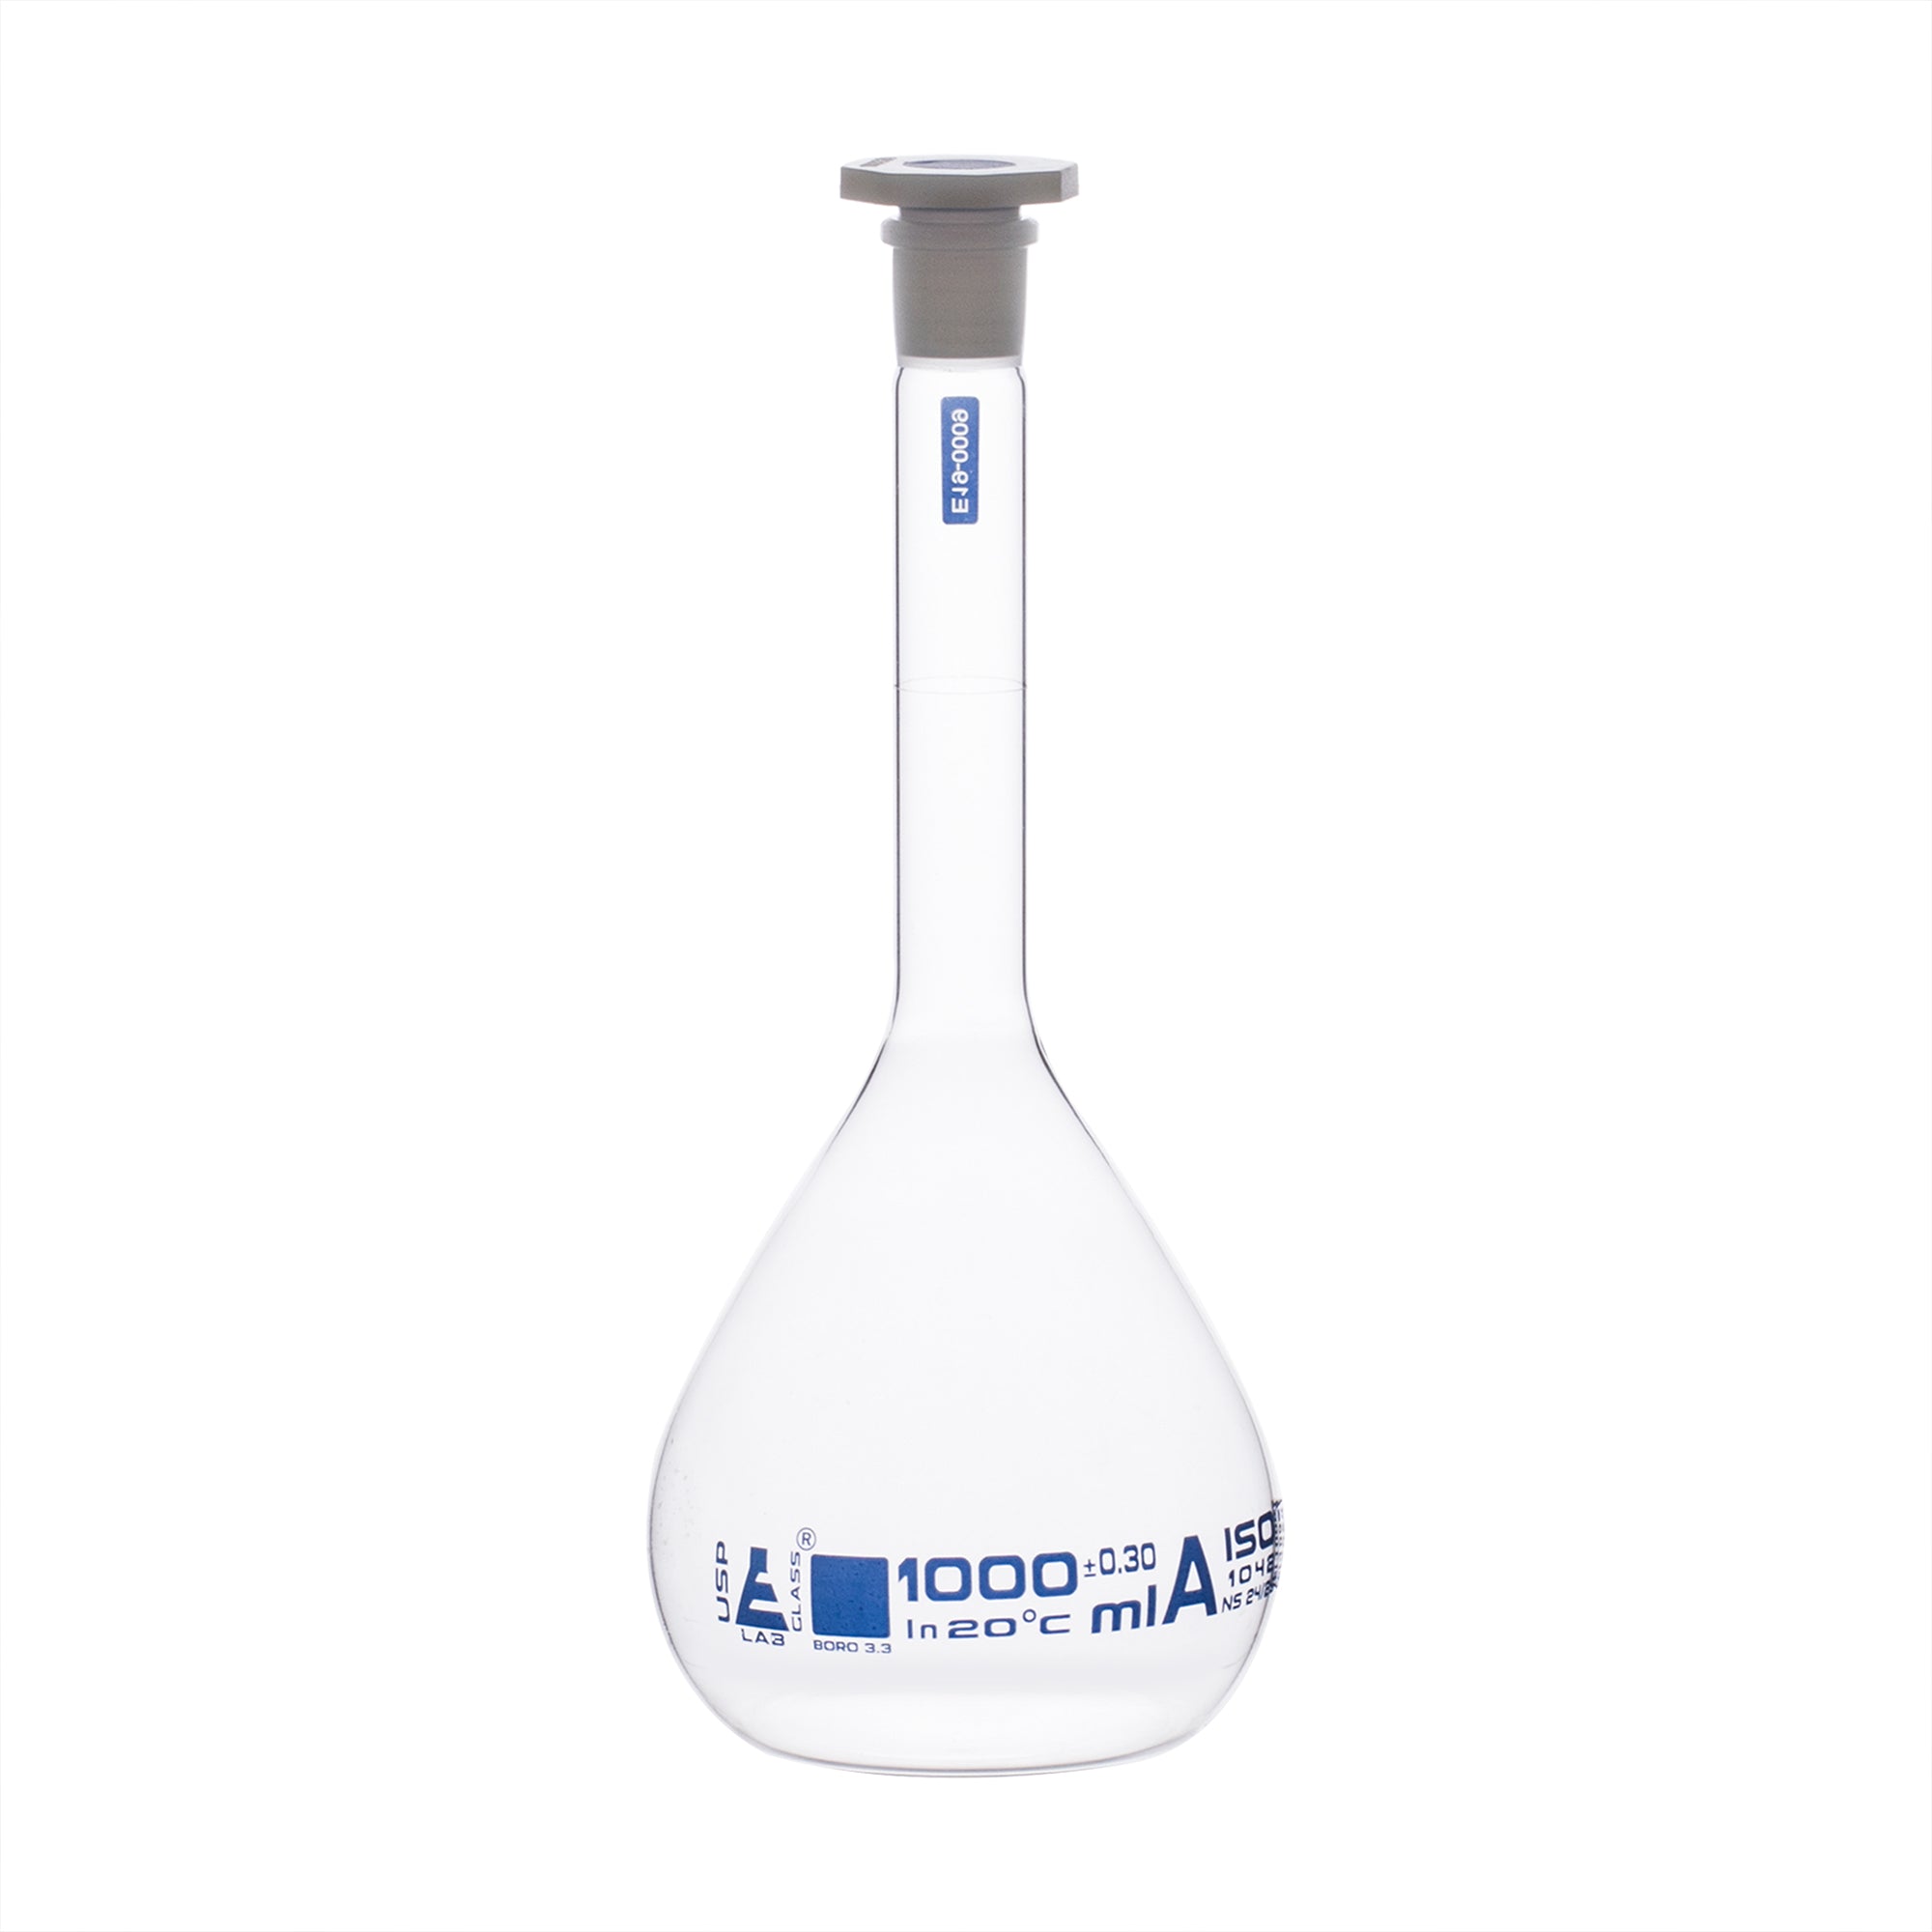 Borosilicate Glass Volumetric Flask with Solid Glass Stopper, 1000 ml, USP Class A with Individual Work Certificate,  Pack of 2, Autoclavable